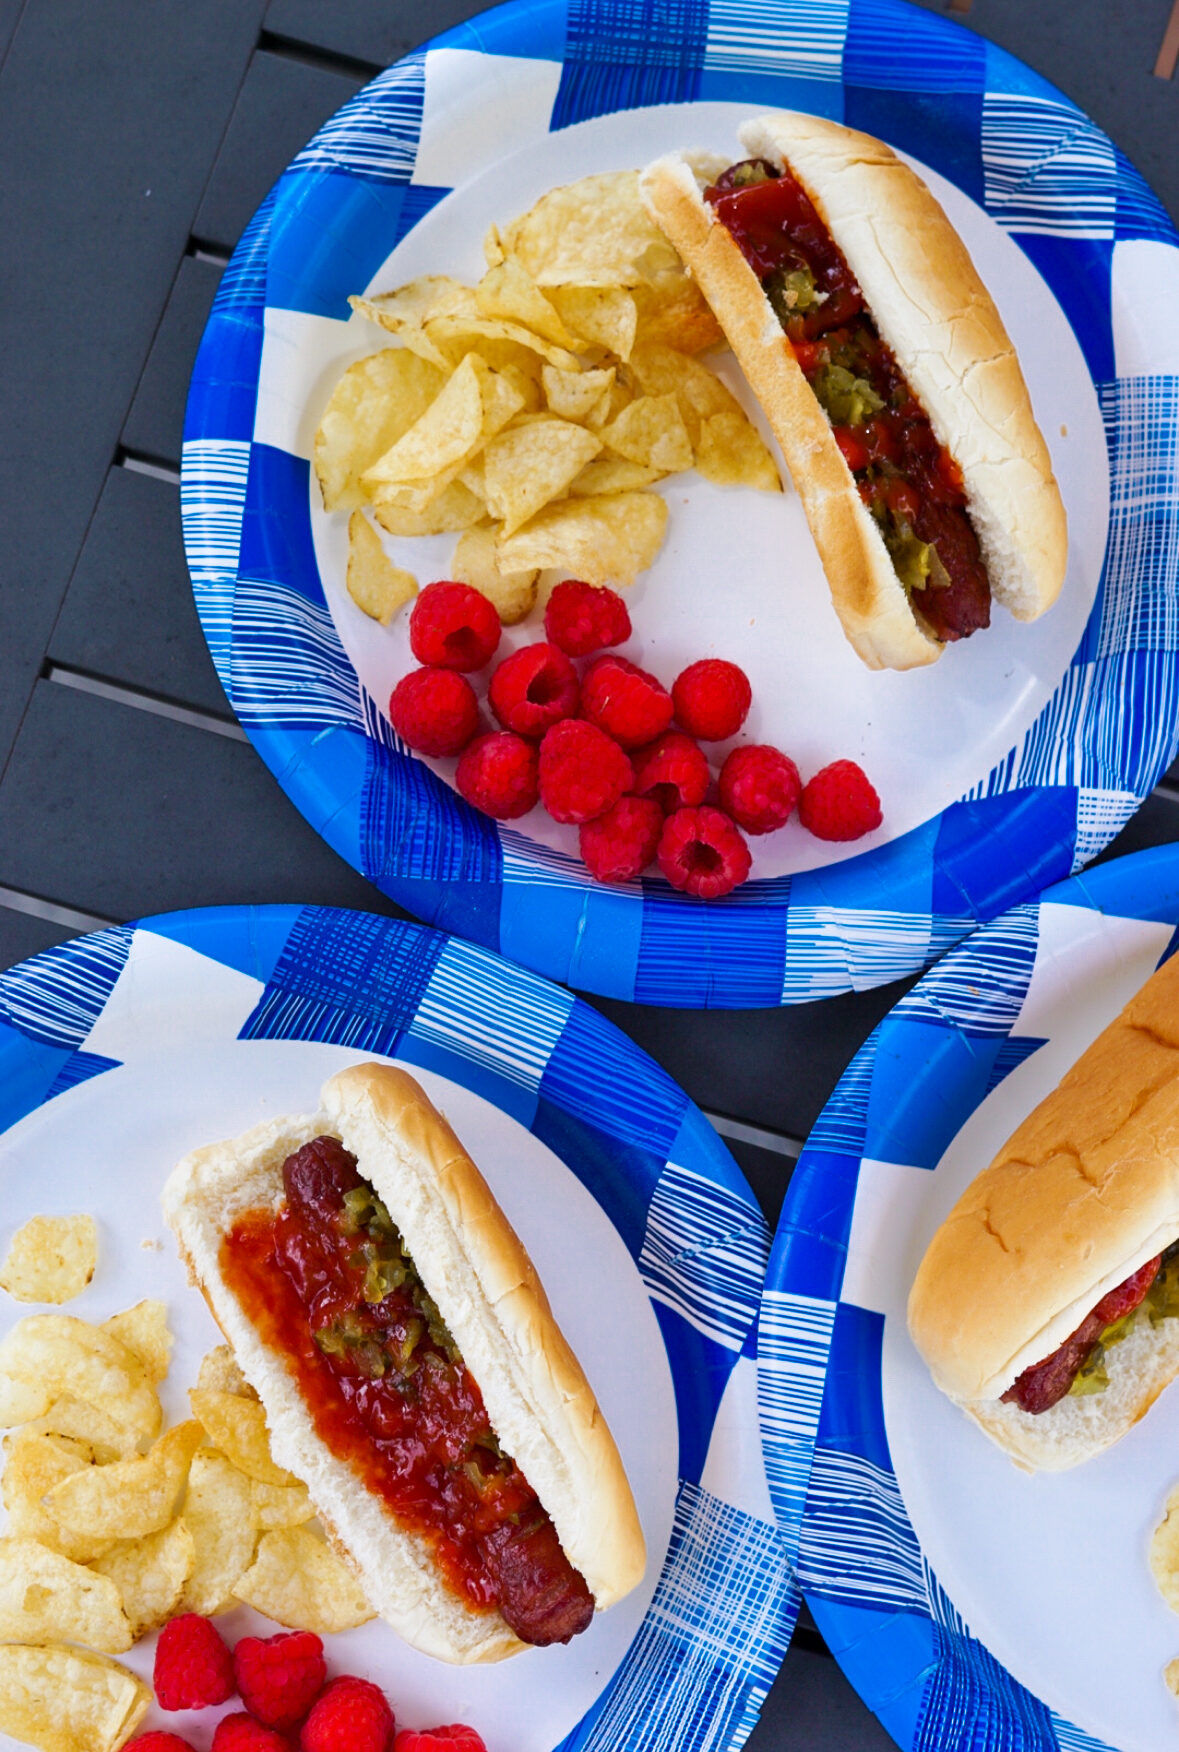 Backyard BBQ bliss awaits! I'm sharing epic mom hacks for hosting a fun-filled and stress-free feast with your family and friends!